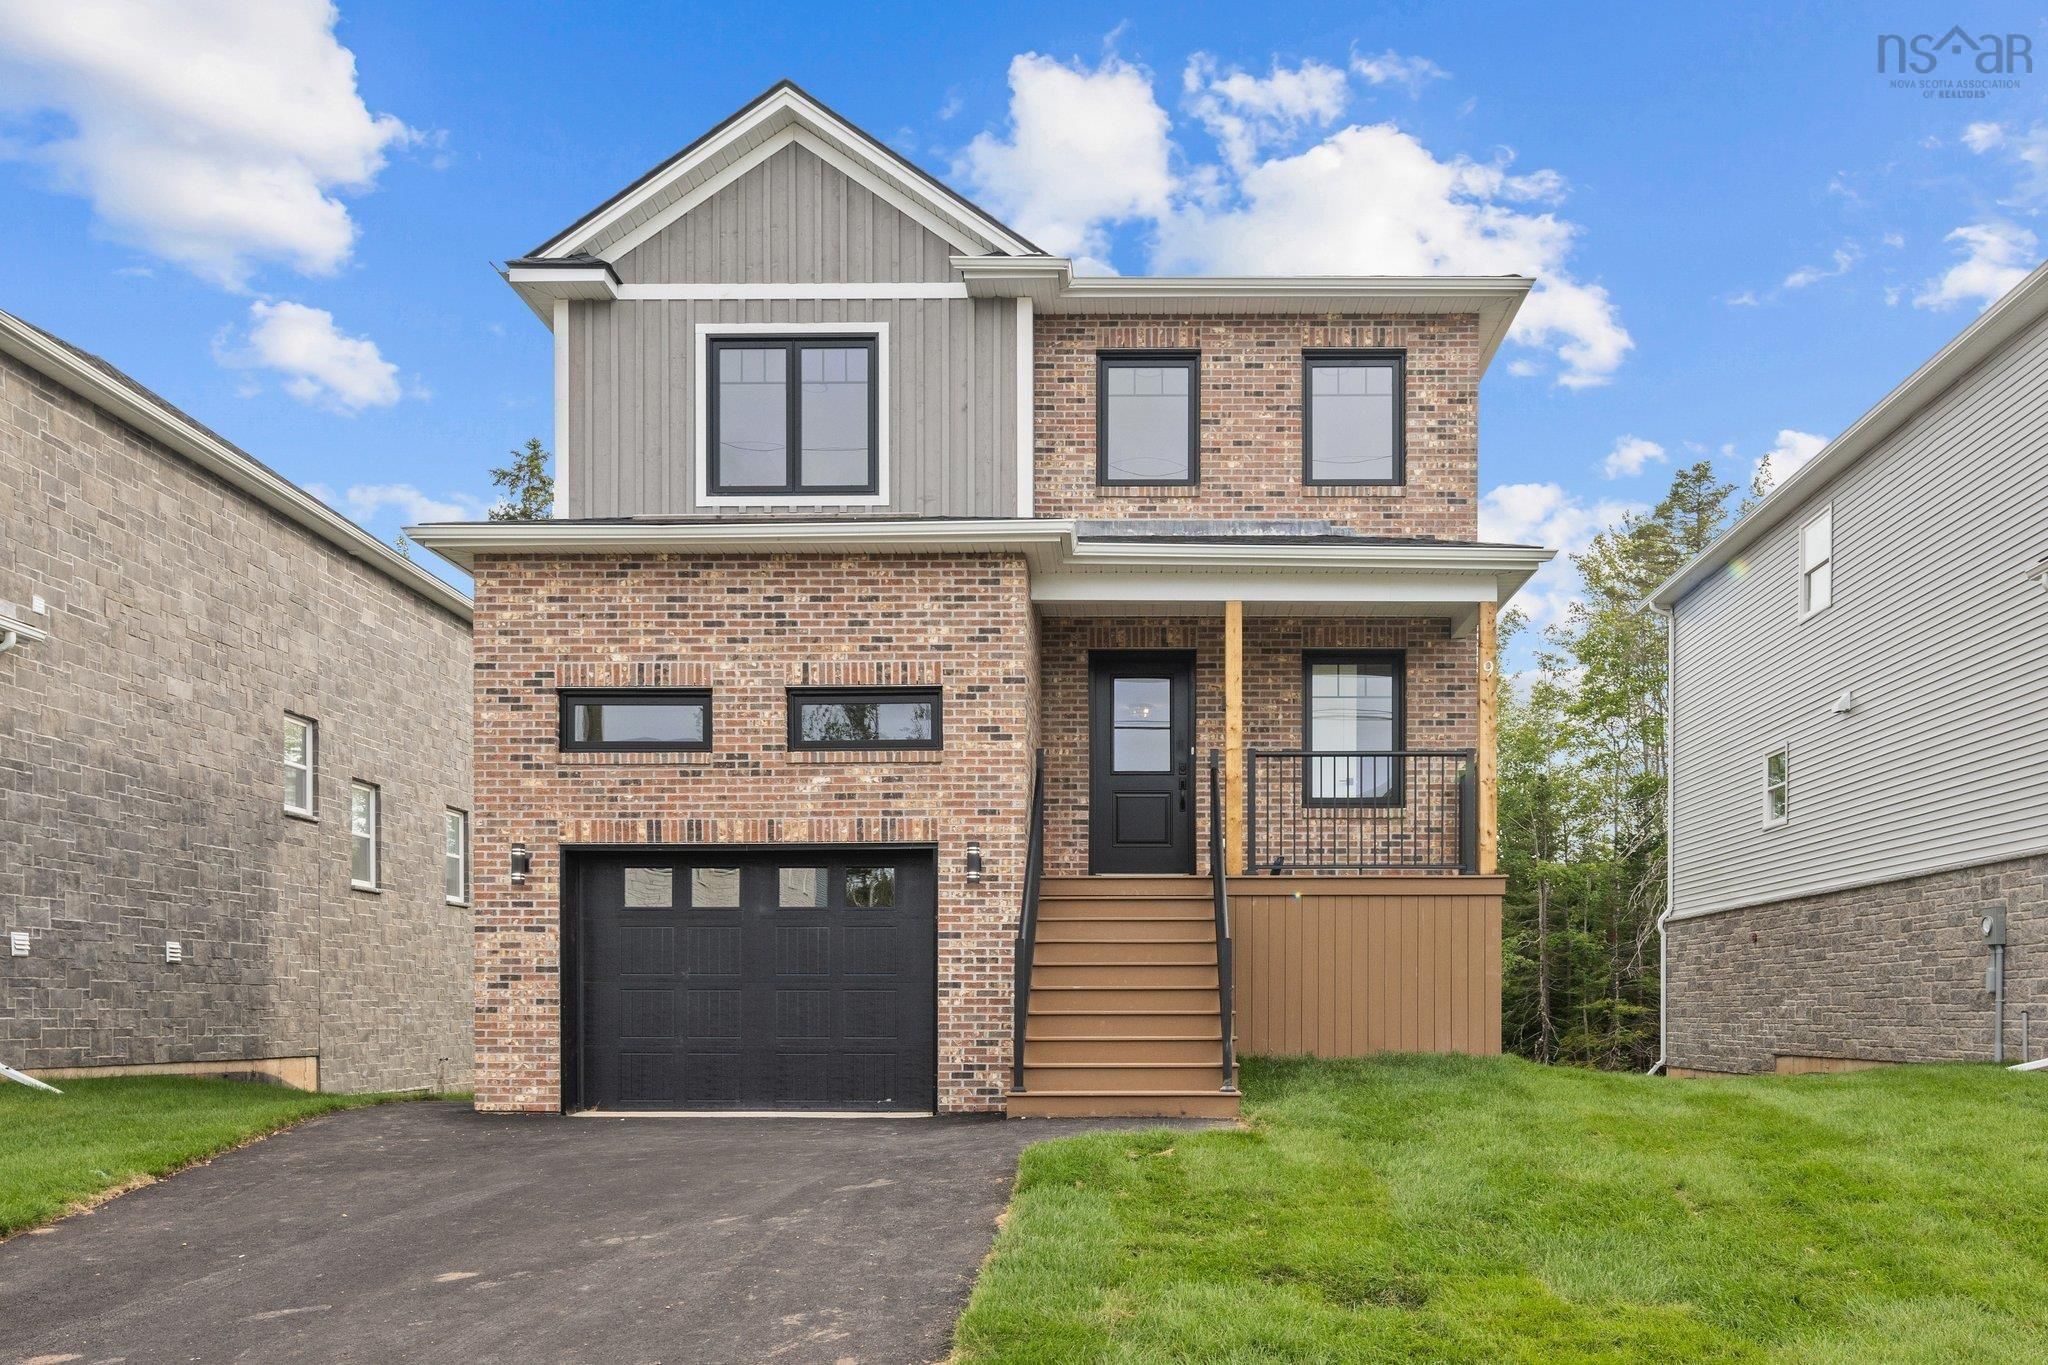 Open House. Open House on Sunday, January 21, 2024 2:00PM - 4:00PM
Please join us to view this beautiful new construction home in the new subdivision of Kiln Creek. Stop by between 2-4pm on Sunday January 21st to check it out!